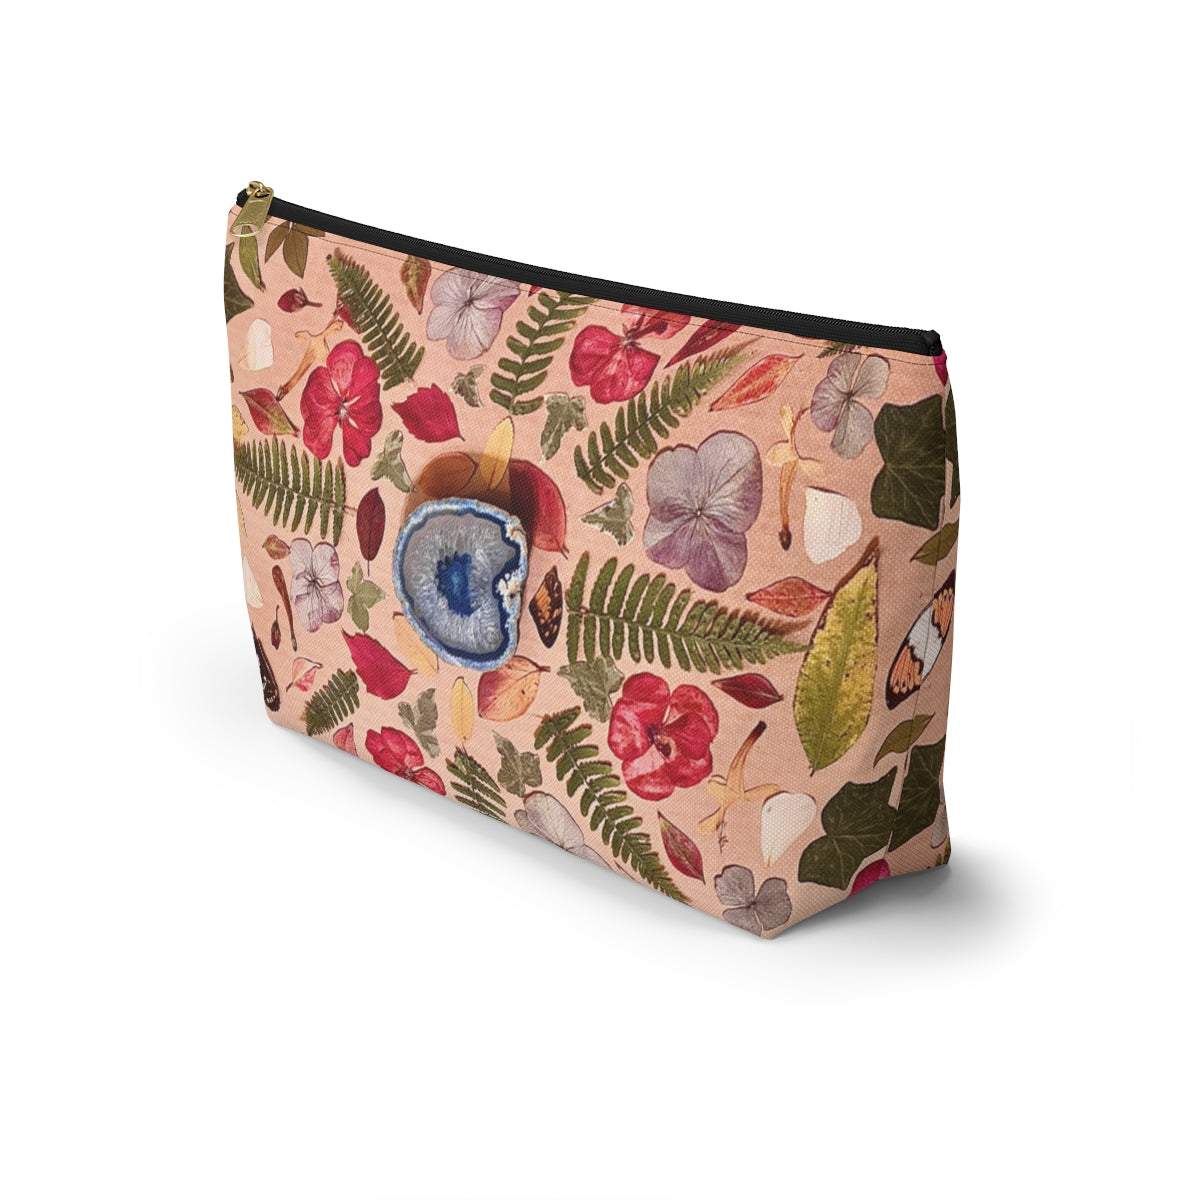 Ana's Bliss - Accessory Pouch